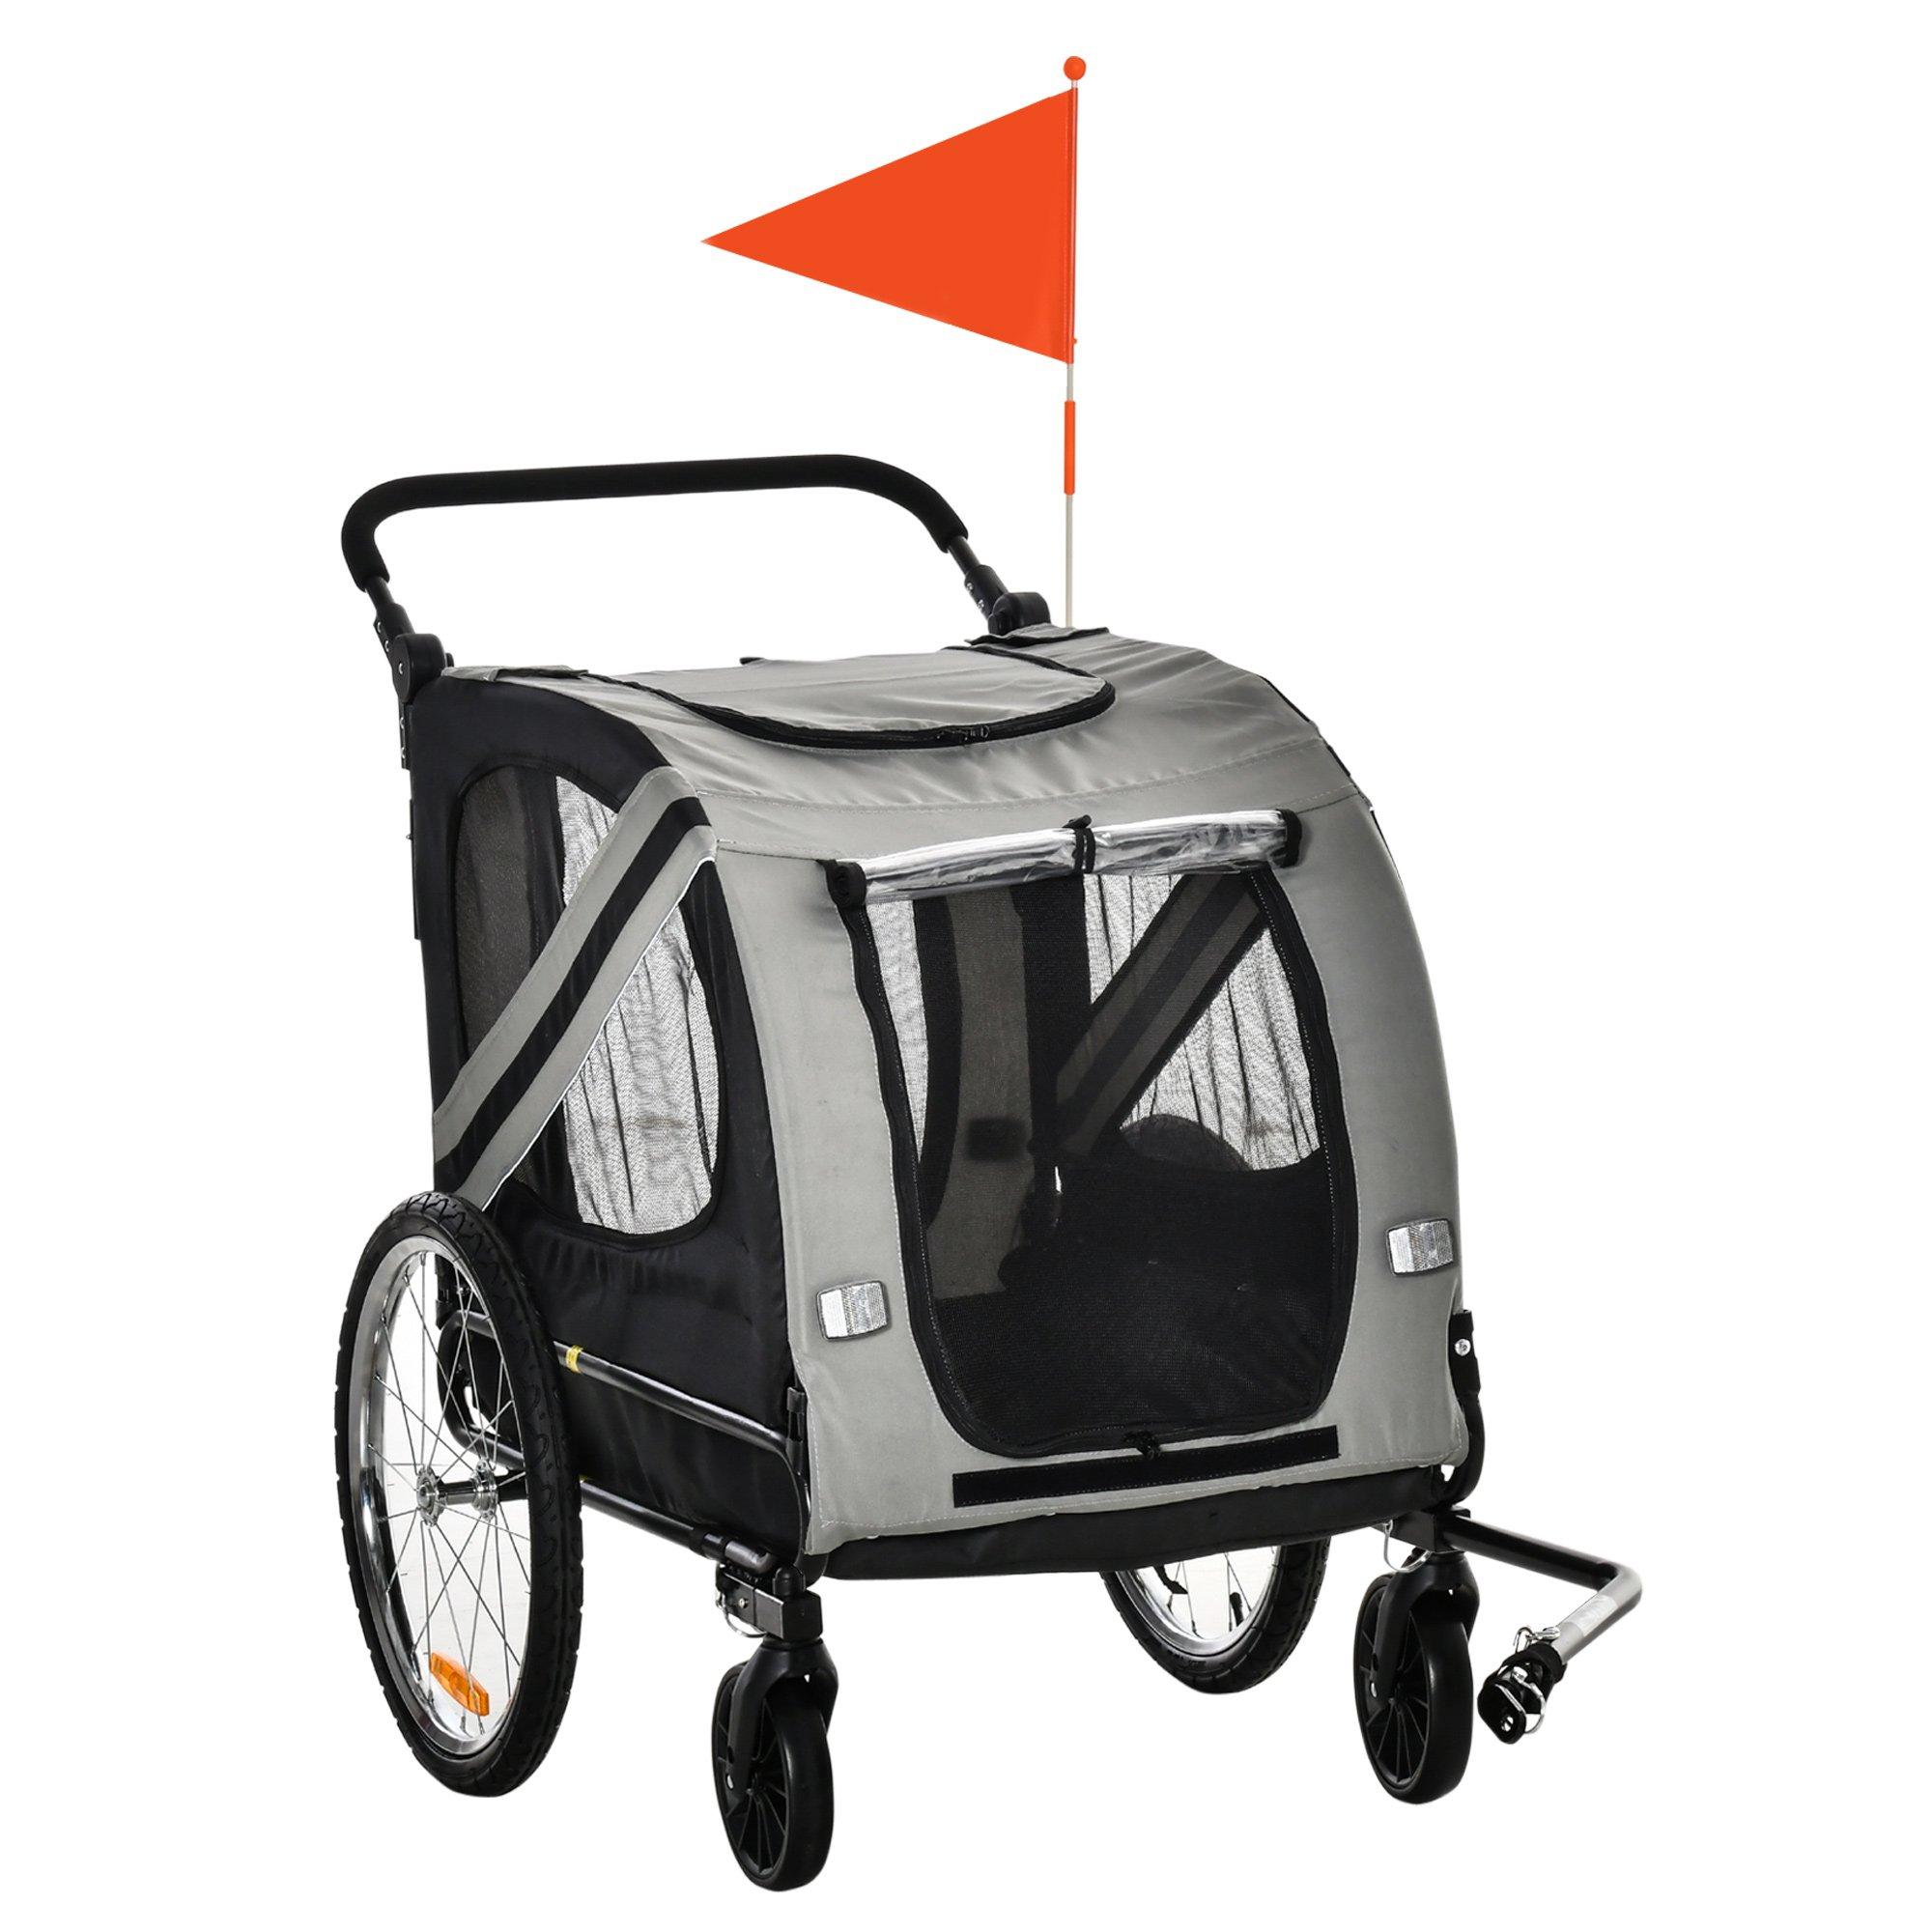 Dog Bike Trailer 2-in-1 Pet Stroller Cart Bicycle Carrier Attachment for Travel in steel frame with 